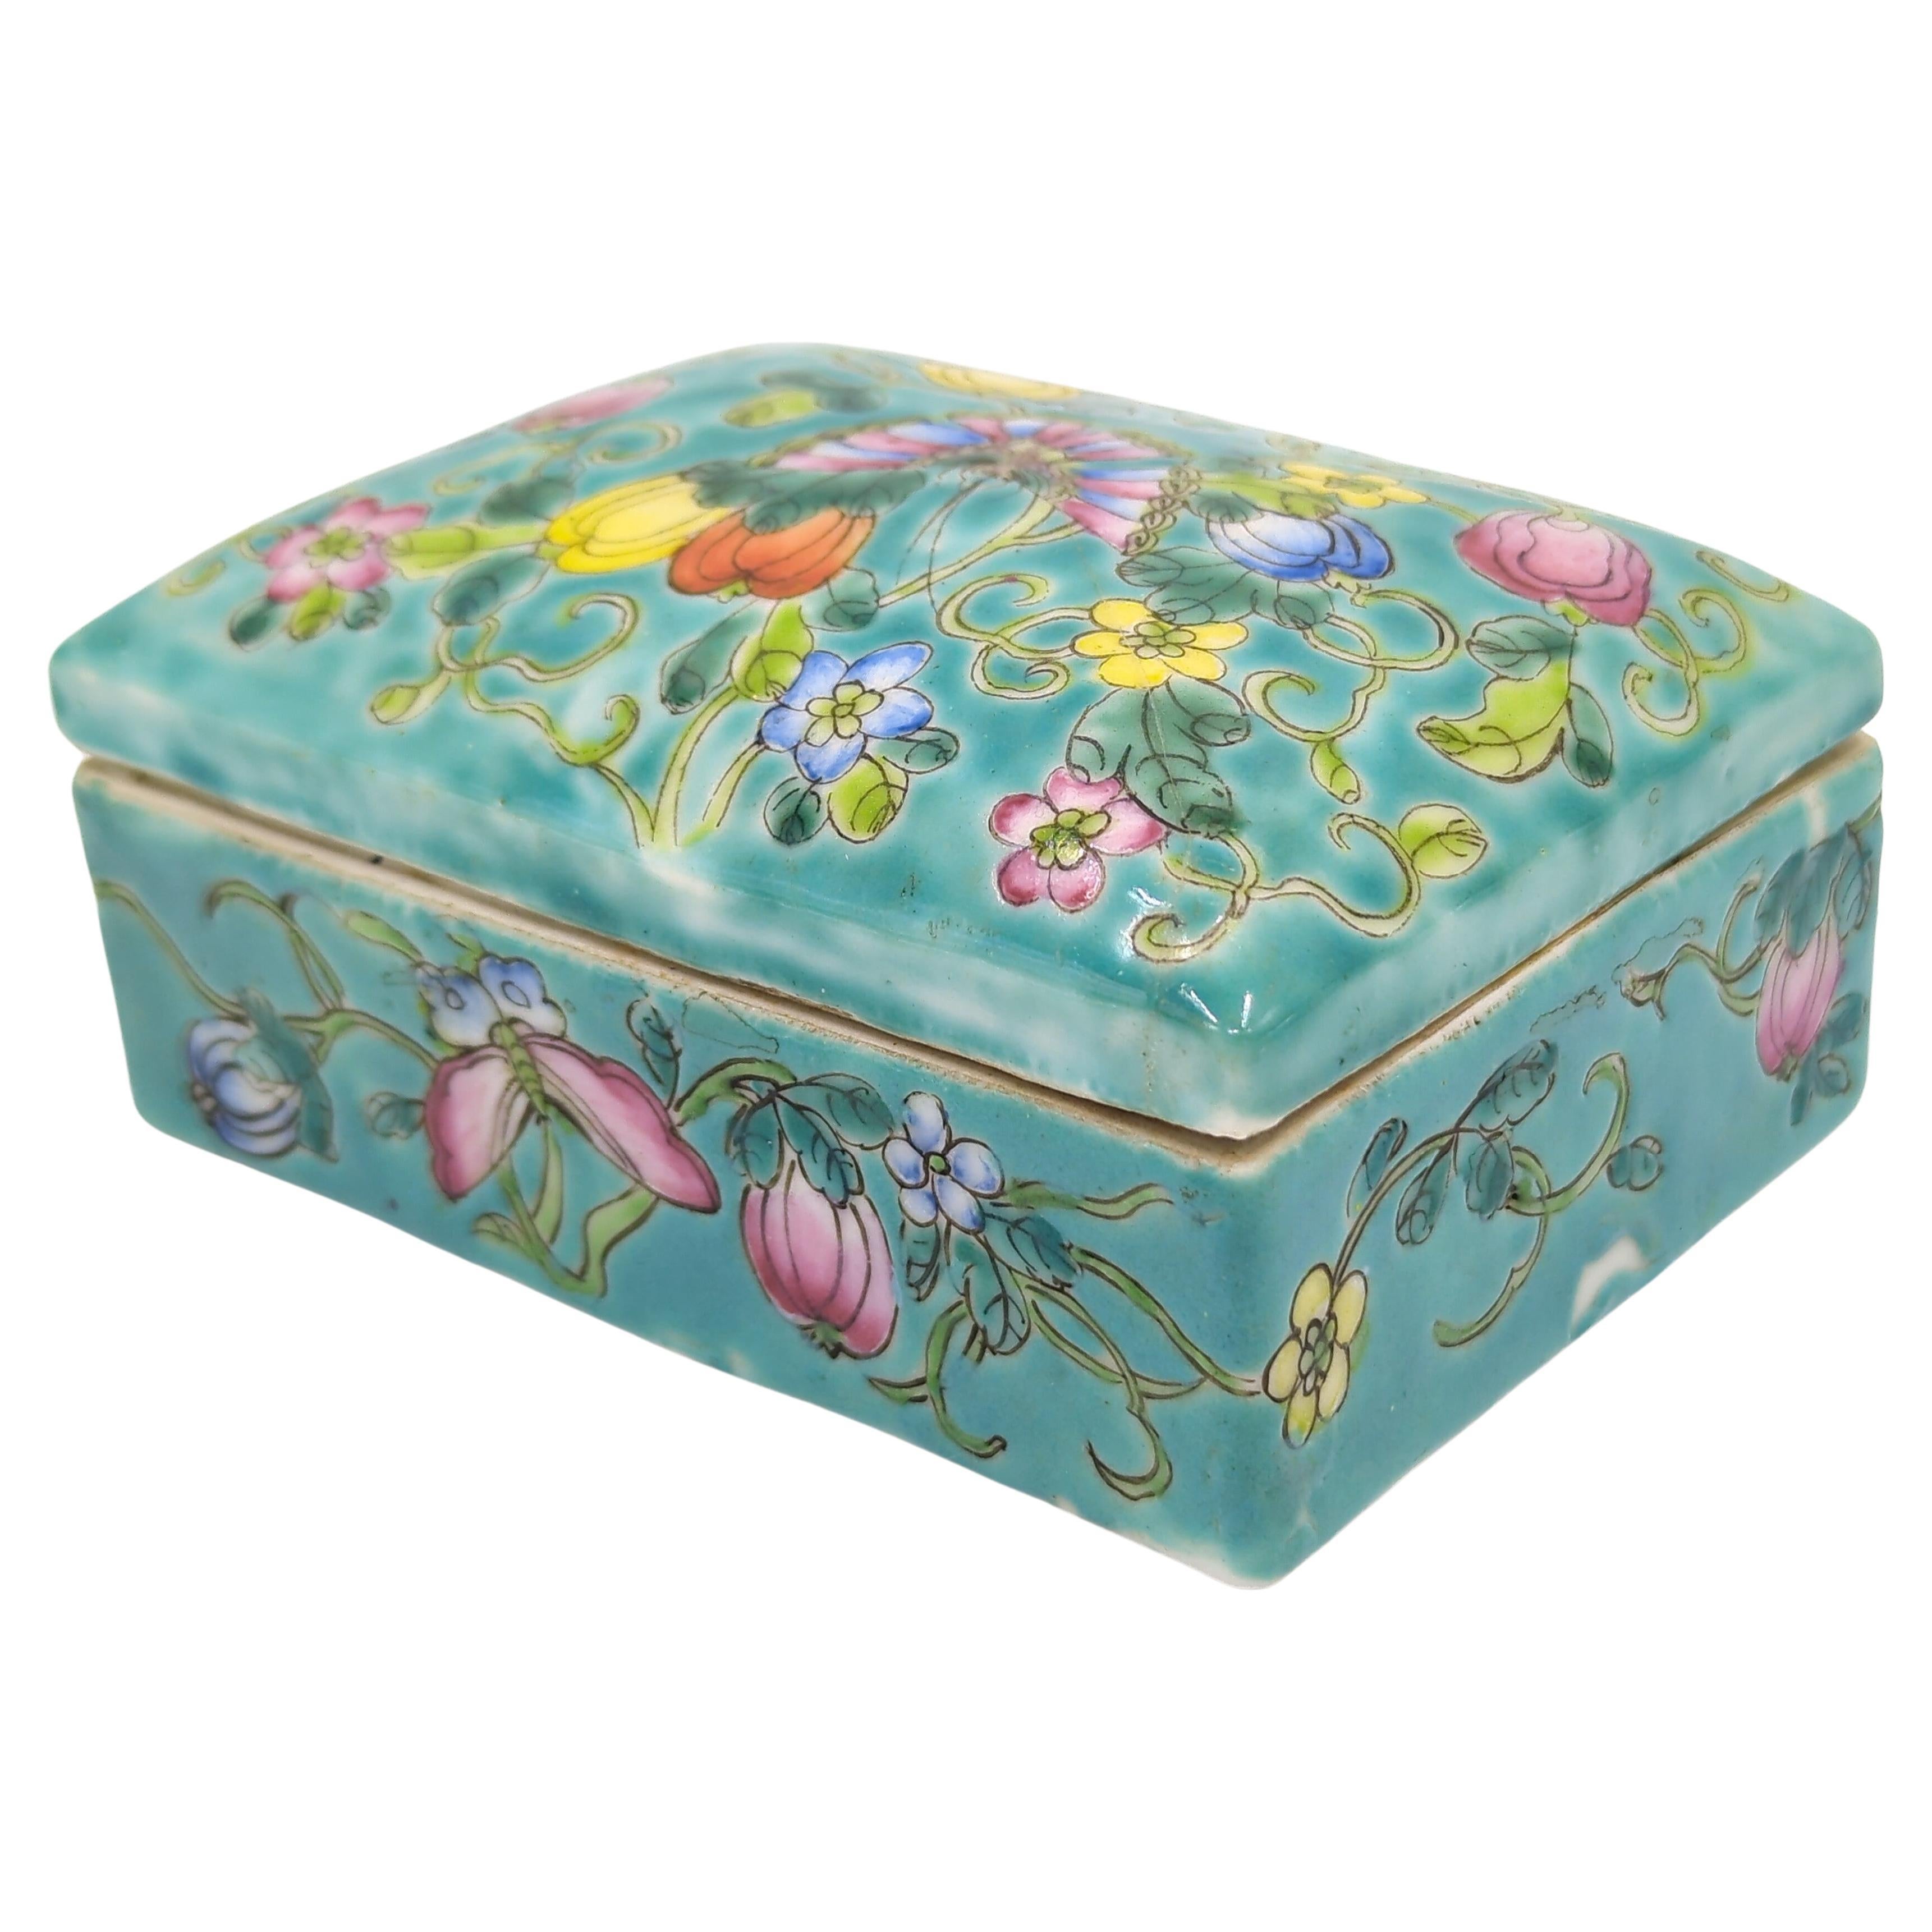 Antique Chinese Porcelain Turquoise Butterfly Covered Jewelry Box 19/20c  In Fair Condition For Sale In Richmond, CA